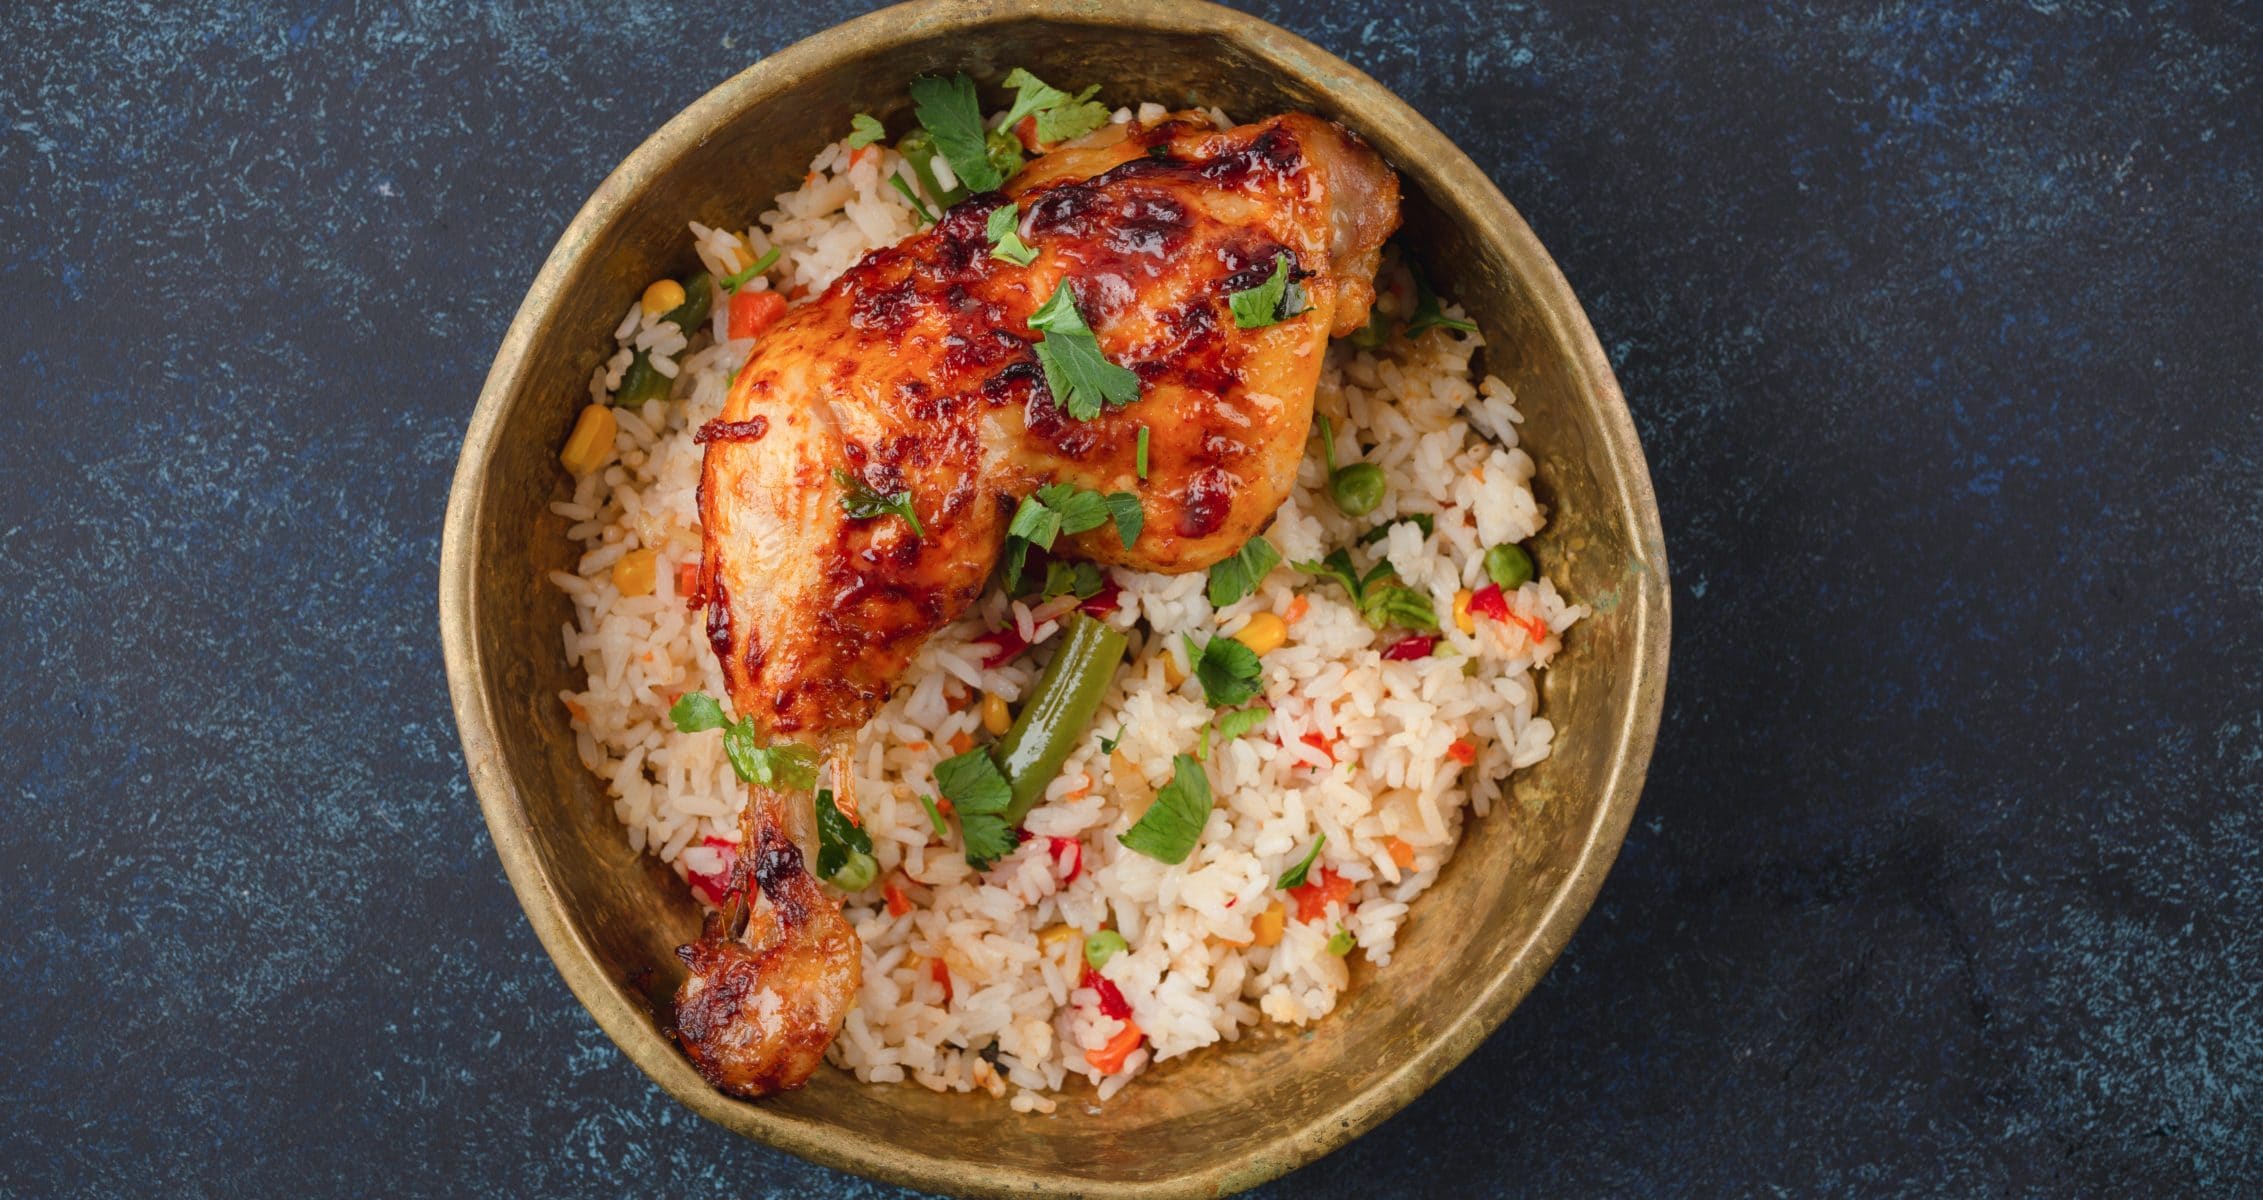 Can A Chicken And Rice Diet Help With Weight Loss?